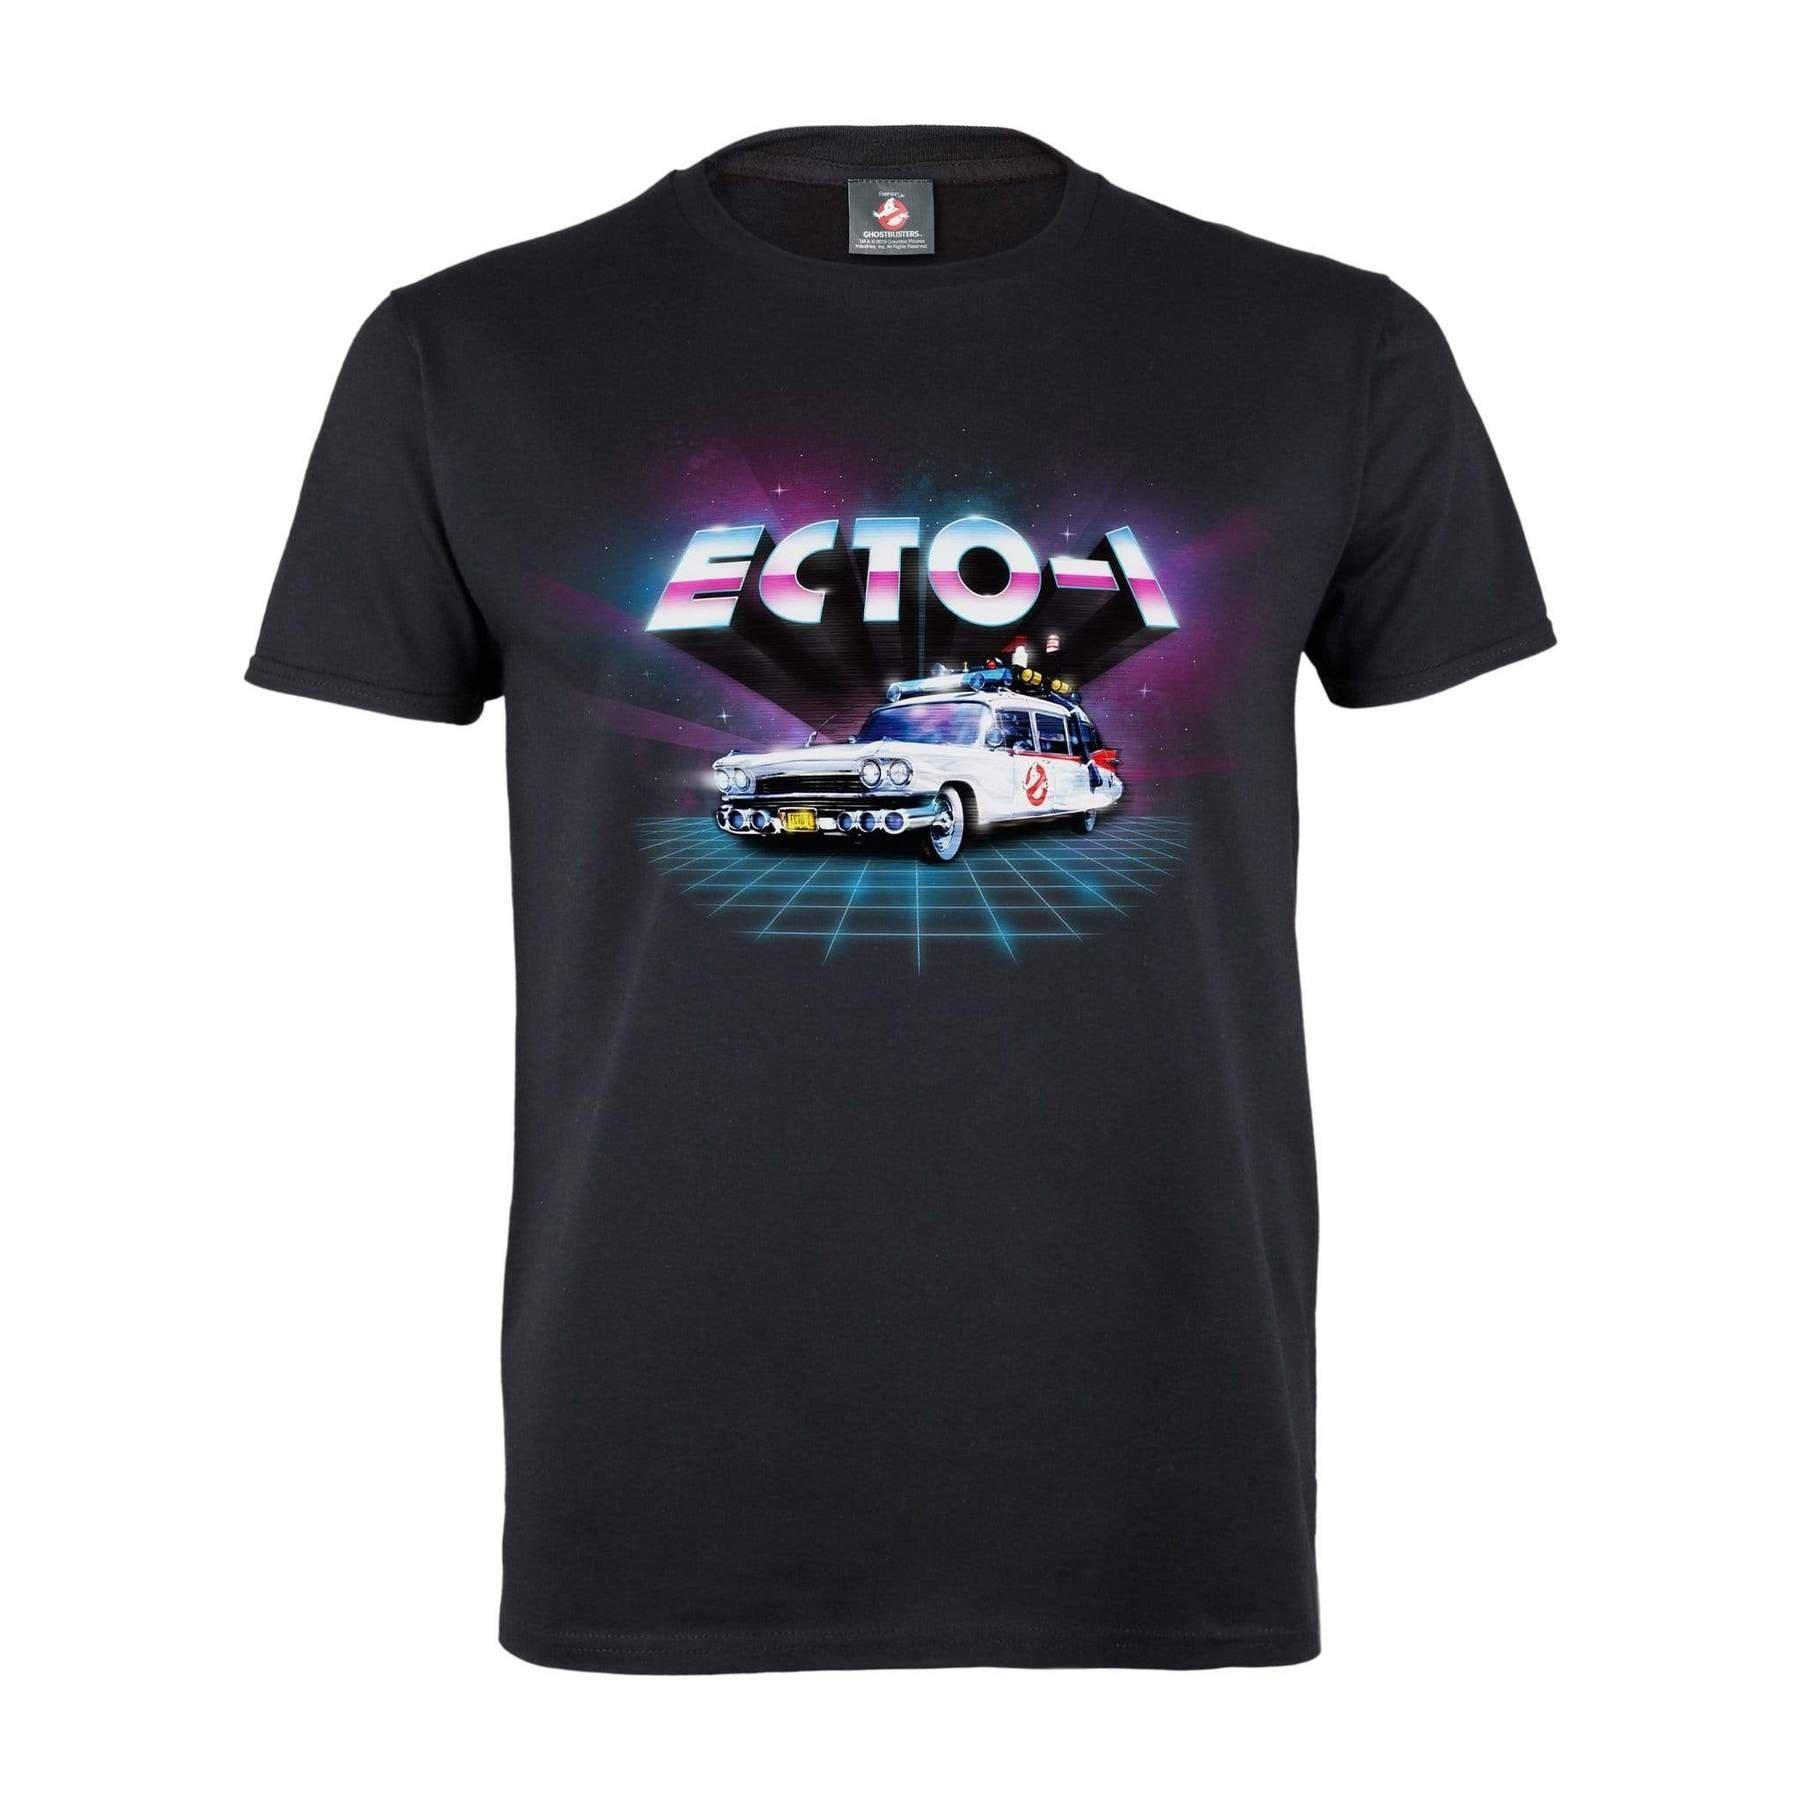 Image of Ghostbusters Ecto1 TShirt - S